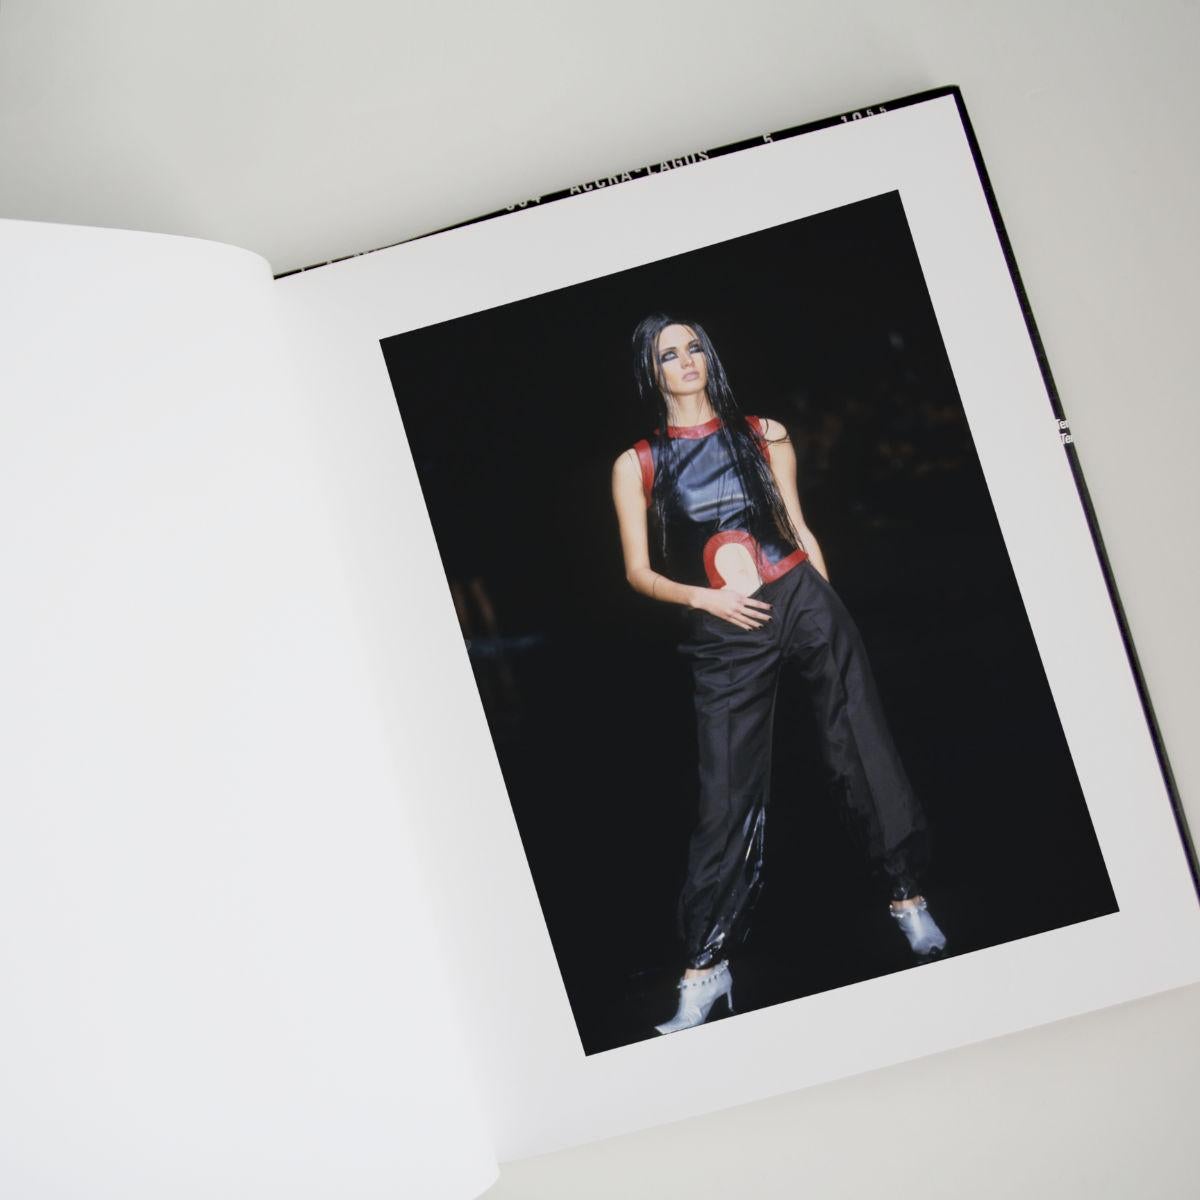 ALEXANDER MCQUEEN

2000. Black and red leather tank top from Alexander McQueen with scalloped neckline from the 